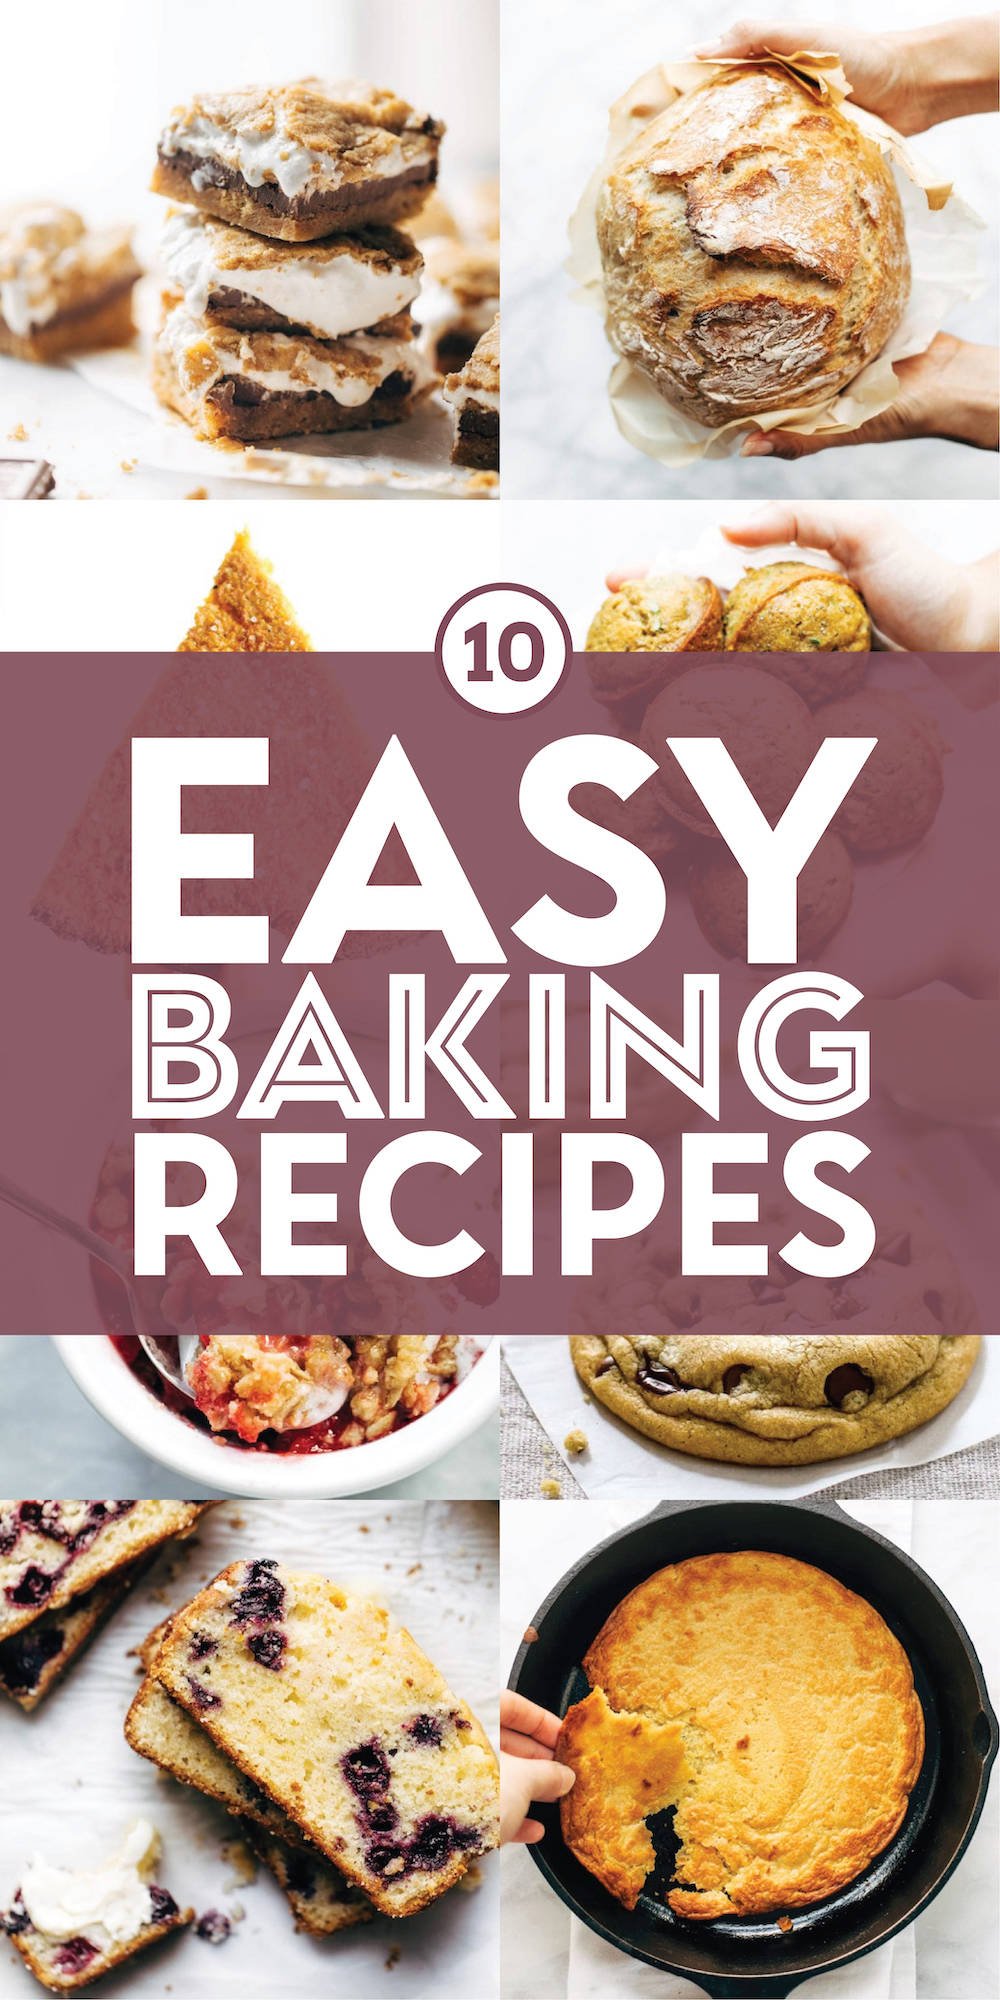 Easy baking recipes in a collage.